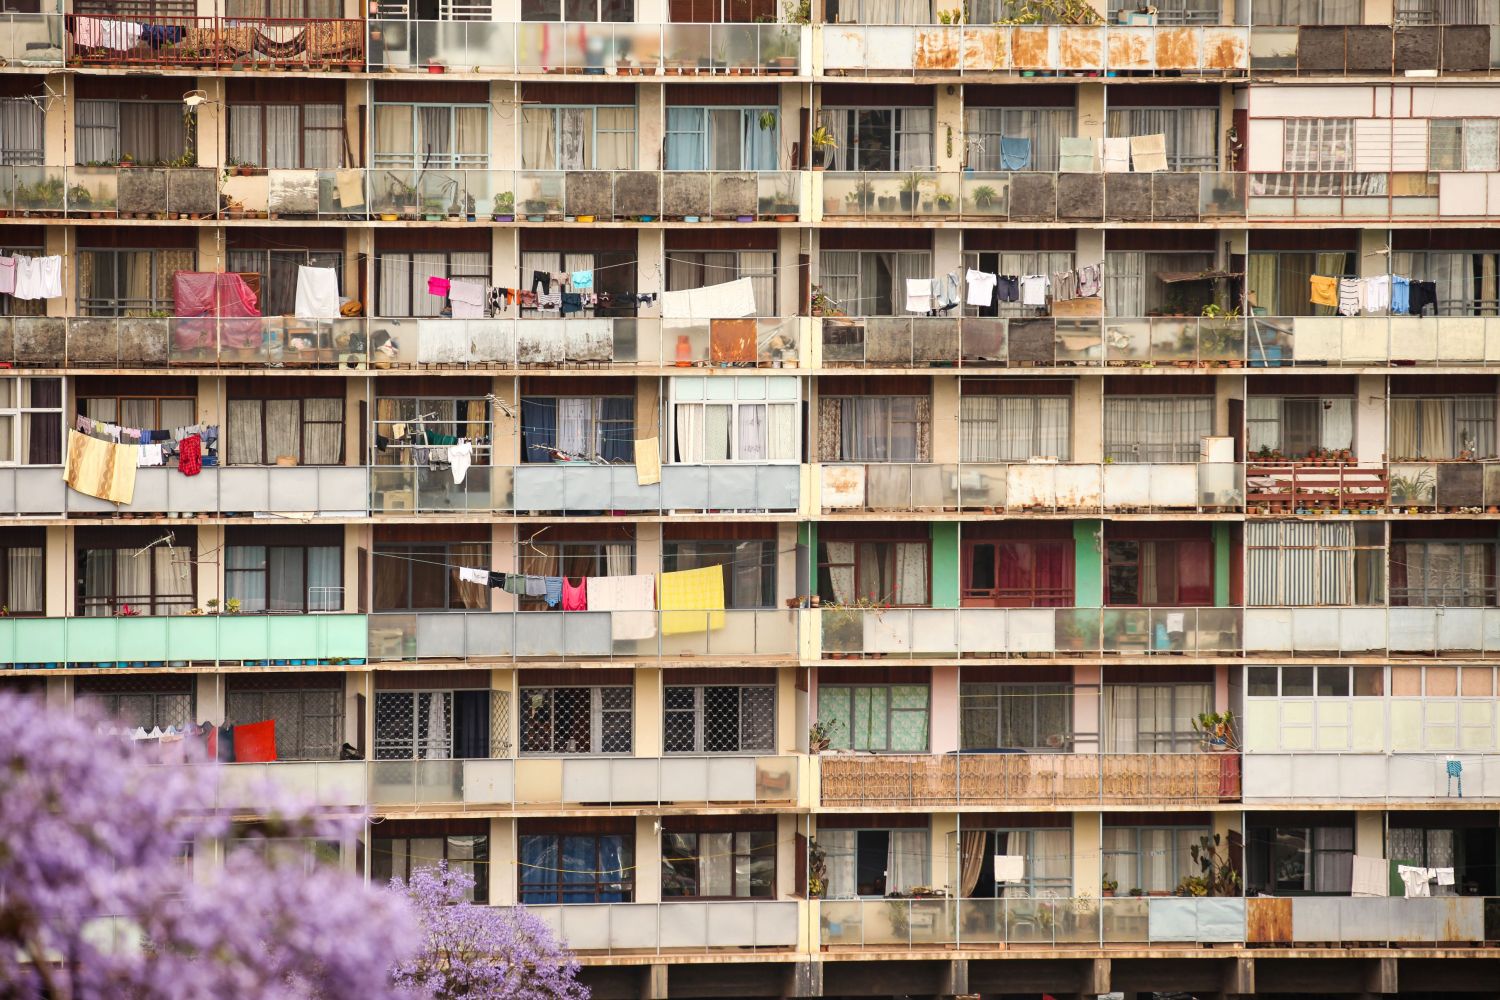 Antananarivo / Madagascar - October 21, 2011: Laundry hangs on clothes lines on balconies of a run down high-rise apart.ment building